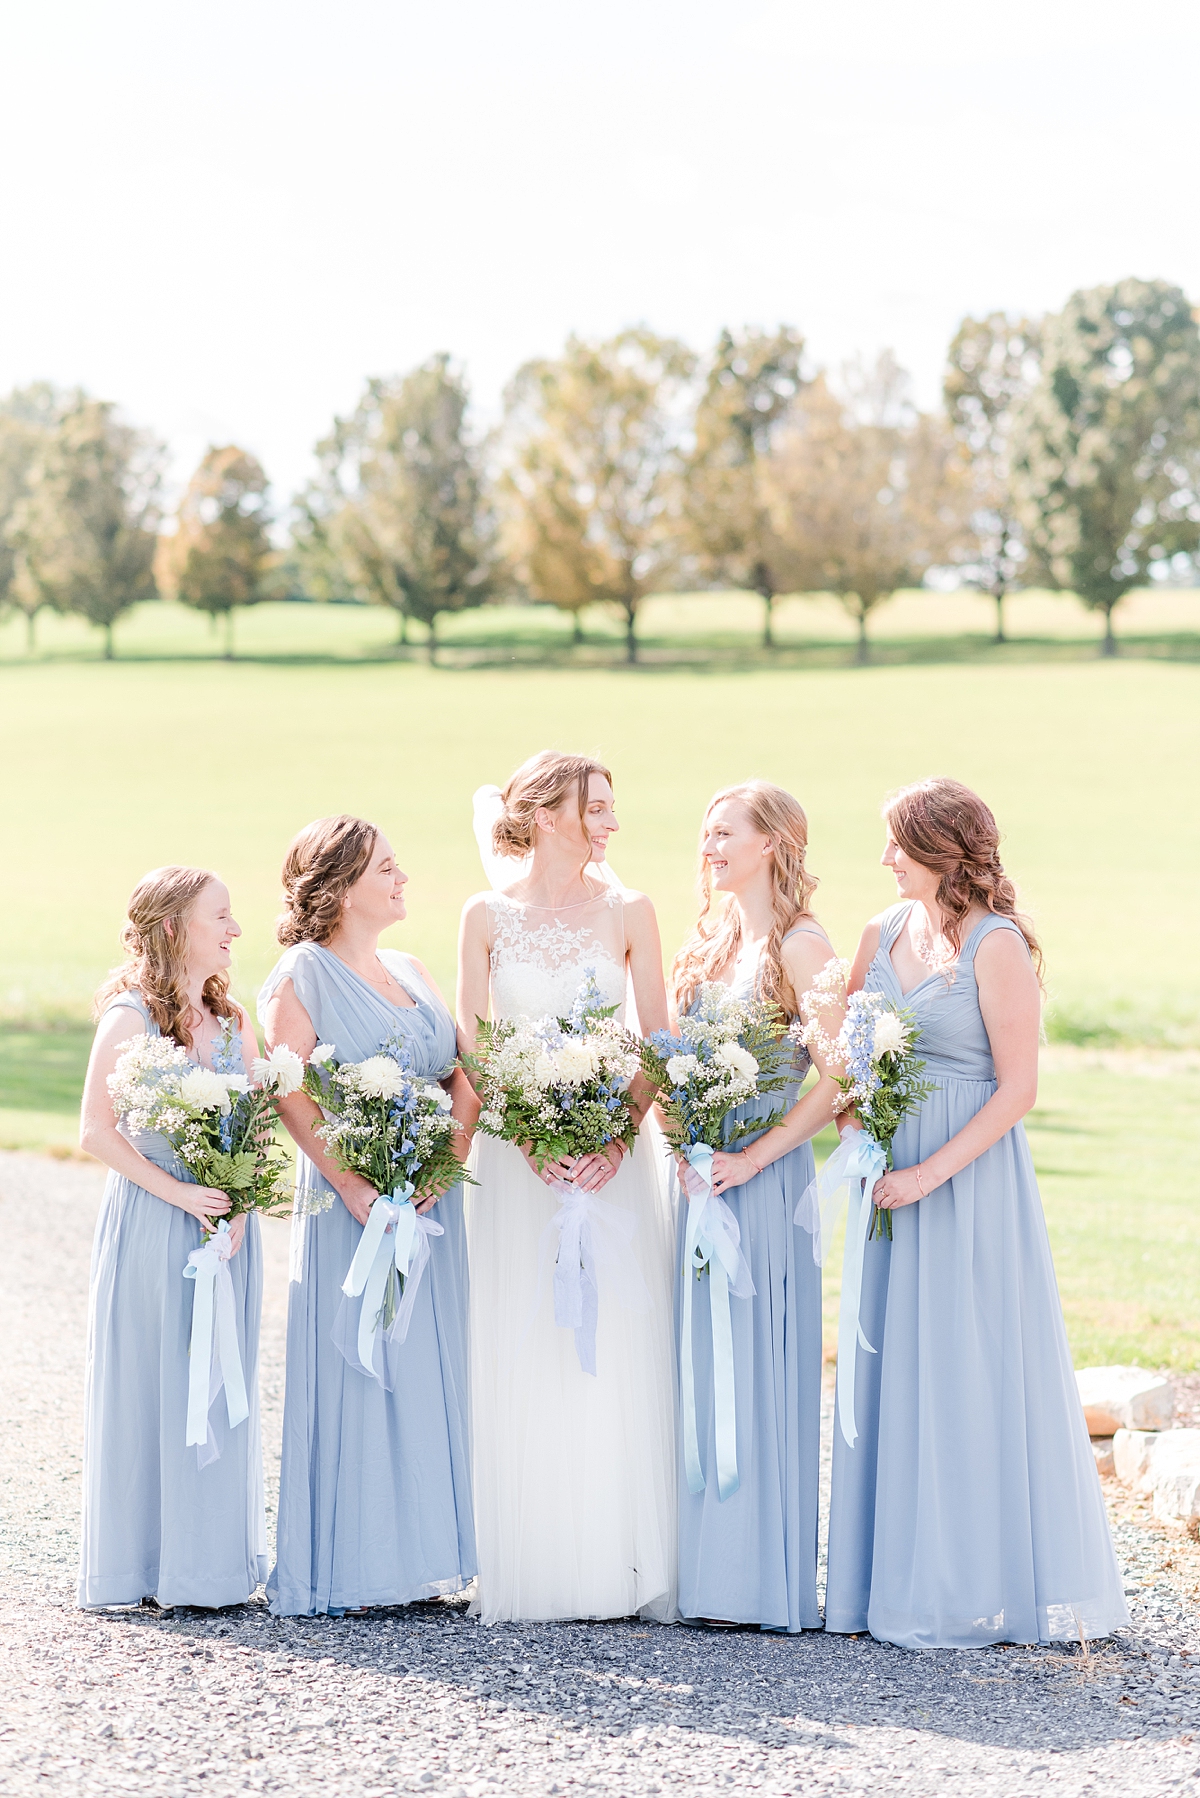 Bridal Party Portraits with Blue Bridesmaid Dresses at Granary at Valley Pike Rustic Wedding. Wedding Photography by Richmond Wedding Photographer Kailey Brianne Photography. 